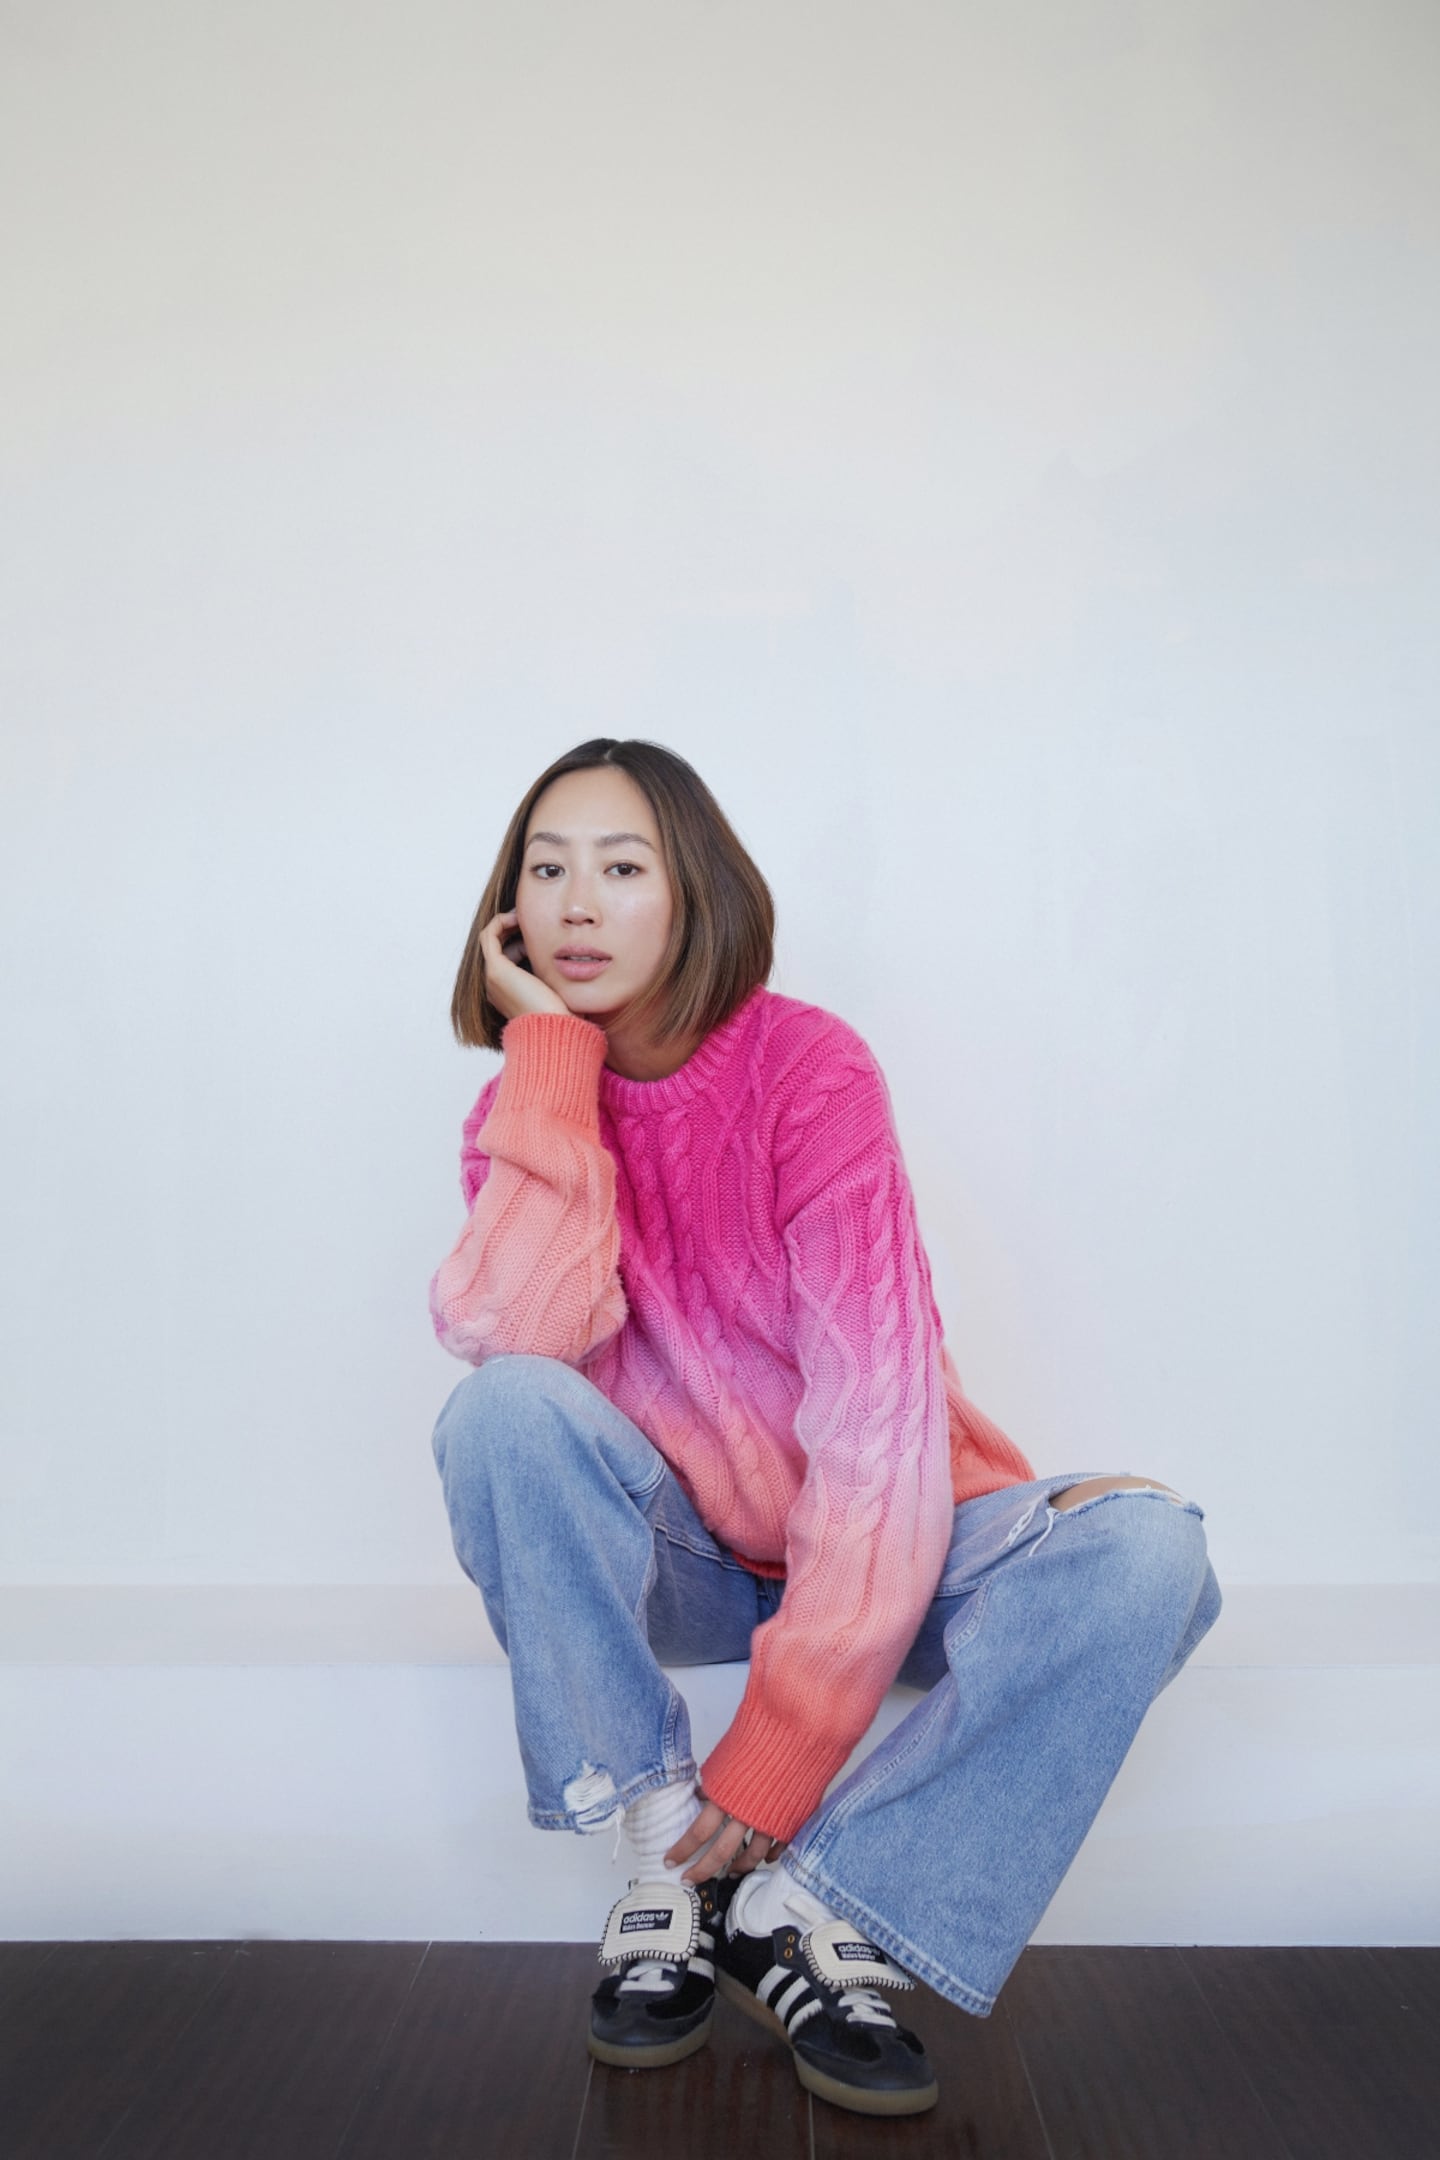 Aimee Song's new brand, Amiya, launches with an initial drop of 10 pieces, primarily knitwear.